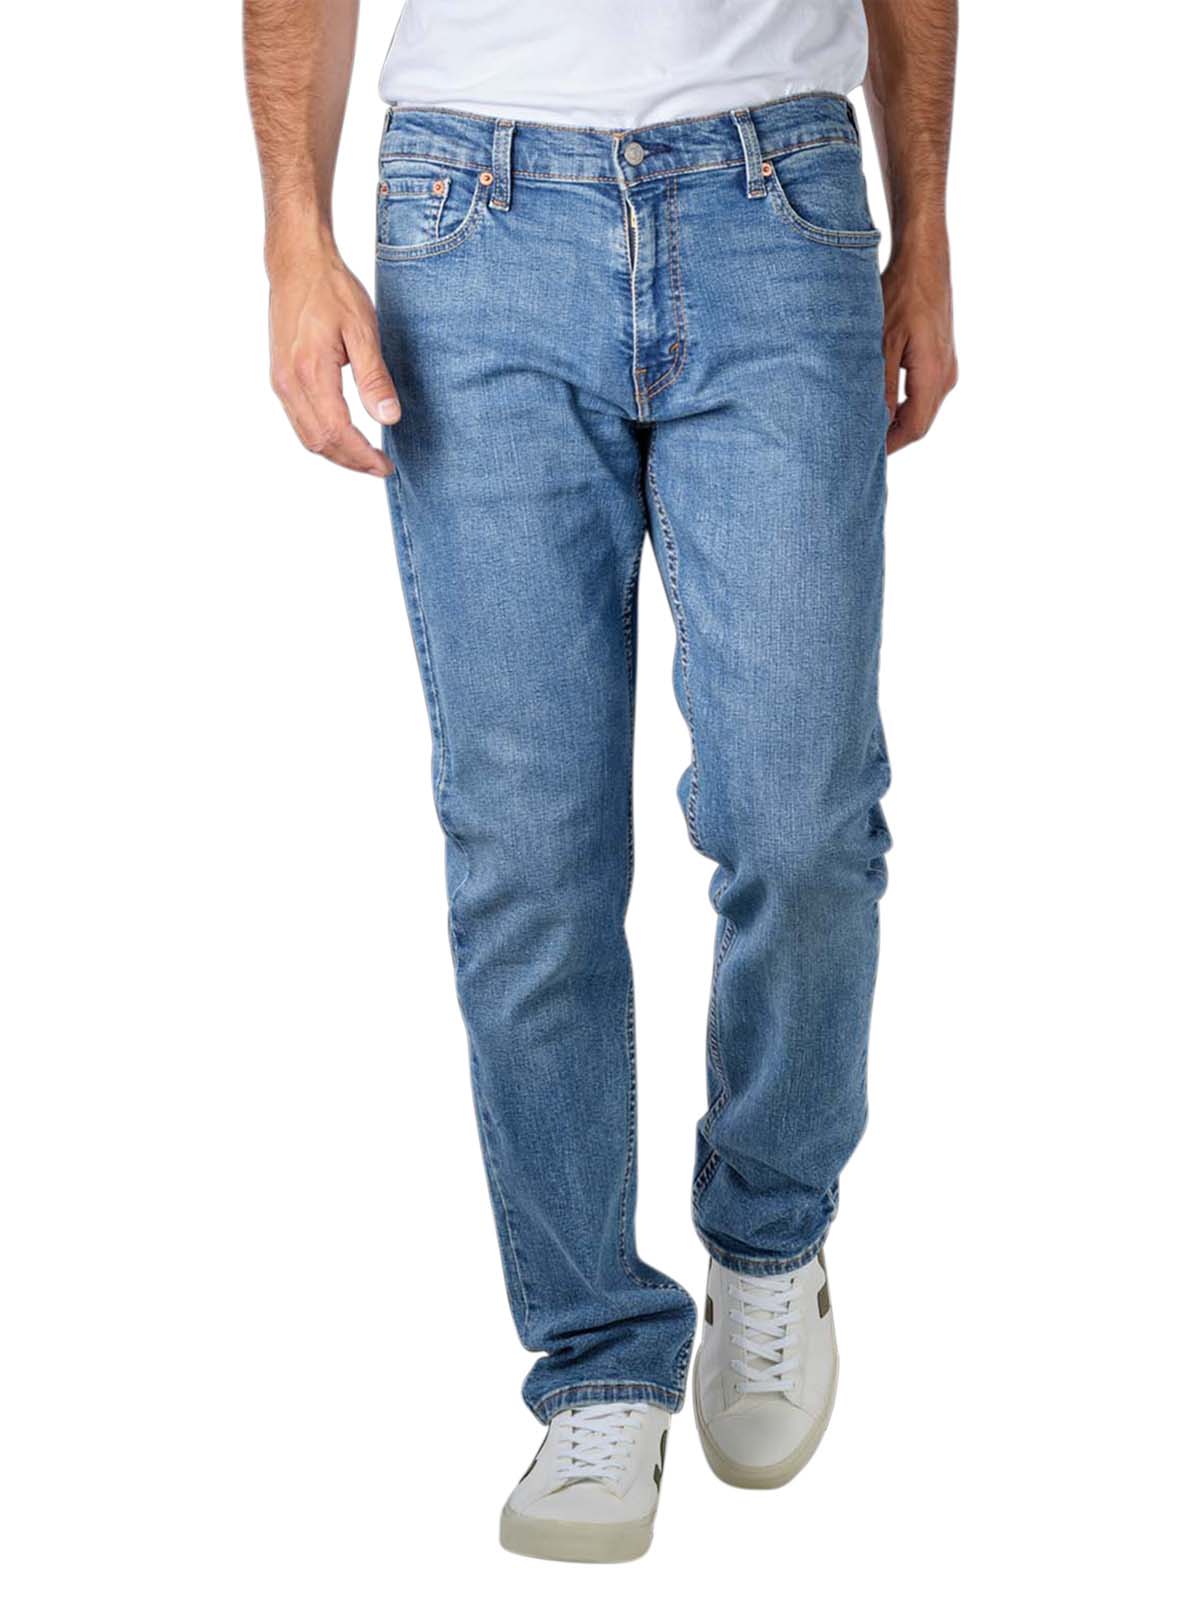 Levi's 511 Jeans Slim Fit the banks - levis flex Levi's Men's Jeans | Free  Shipping on  - SIMPLY LOOK GOOD